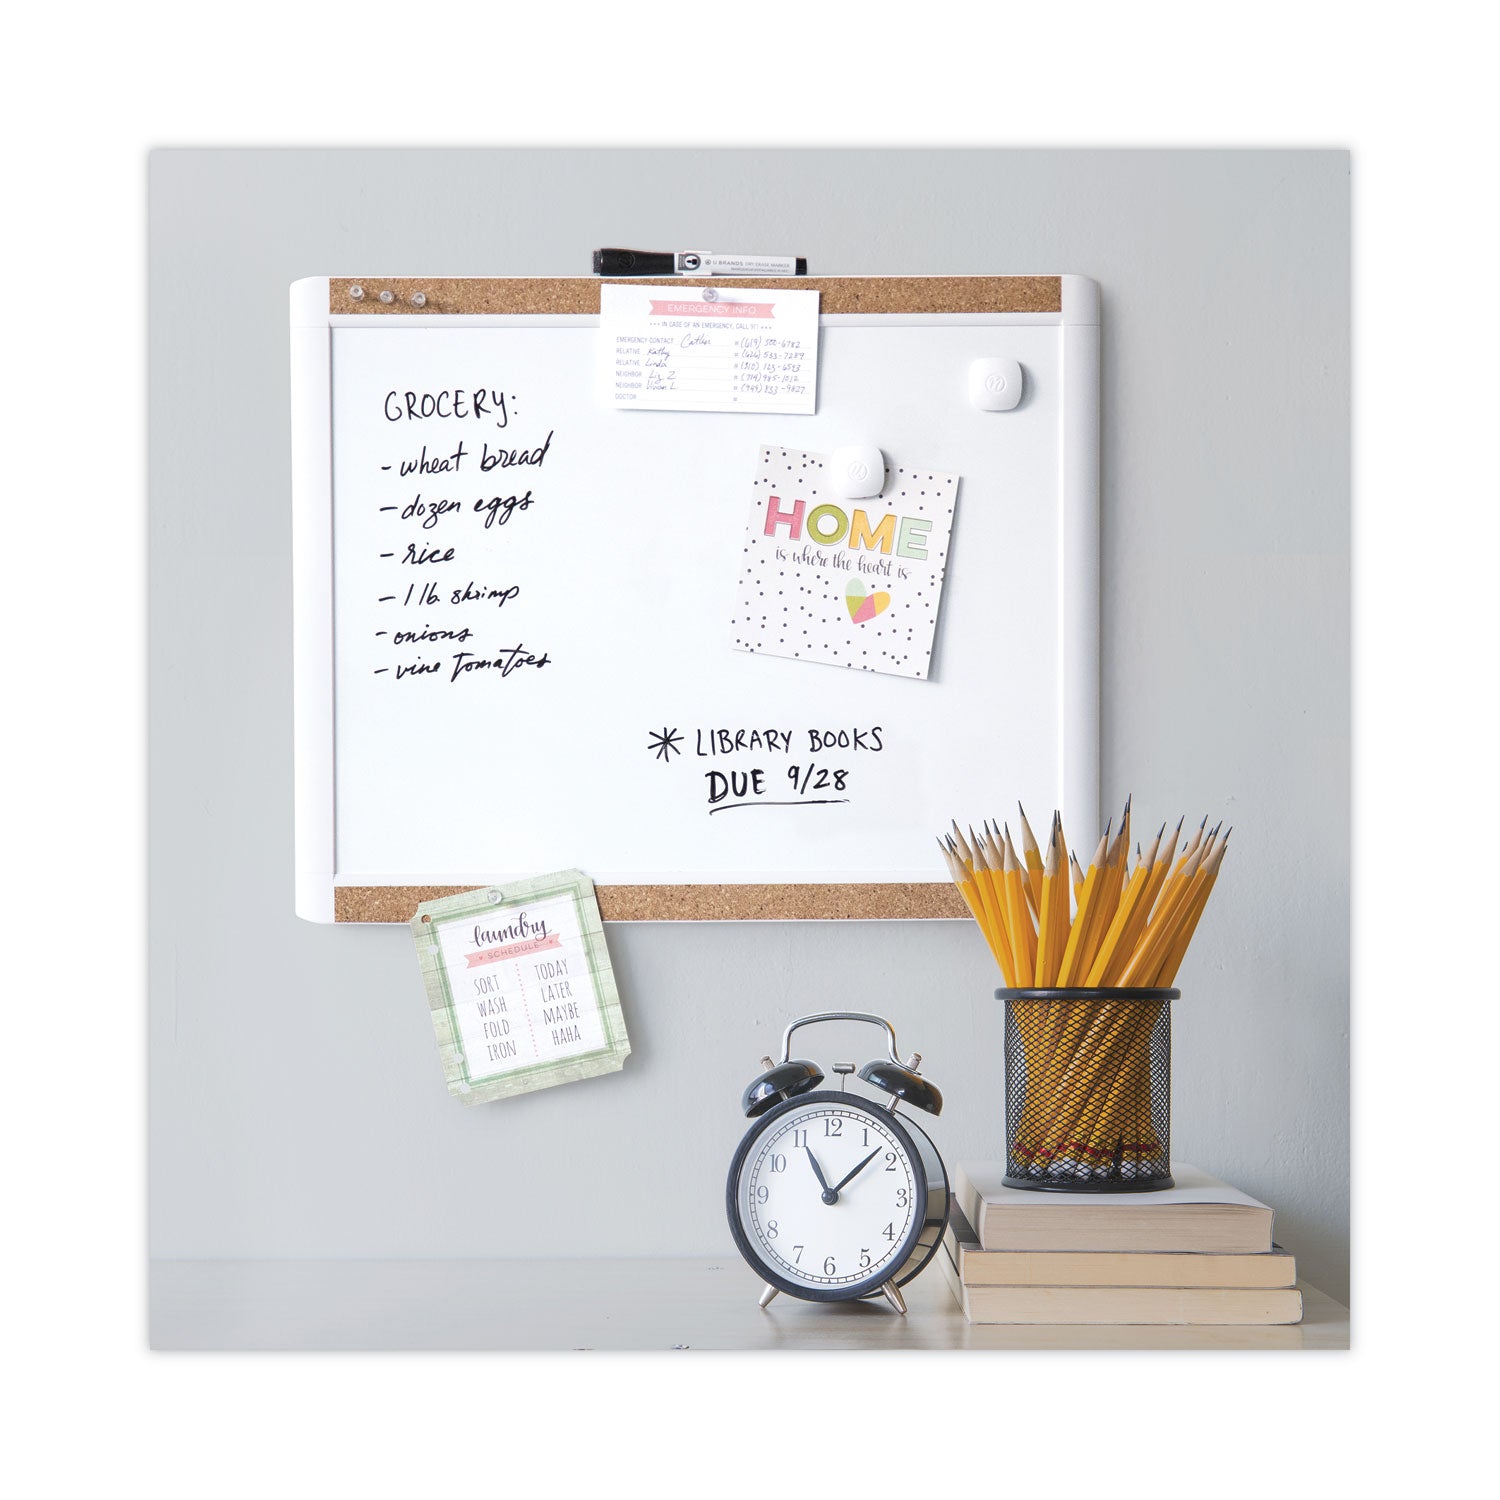 pinit-magnetic-dry-erase-board-with-plastic-frame-20-x-16-white-surface-white-plastic-frame_ubr428u0001 - 5